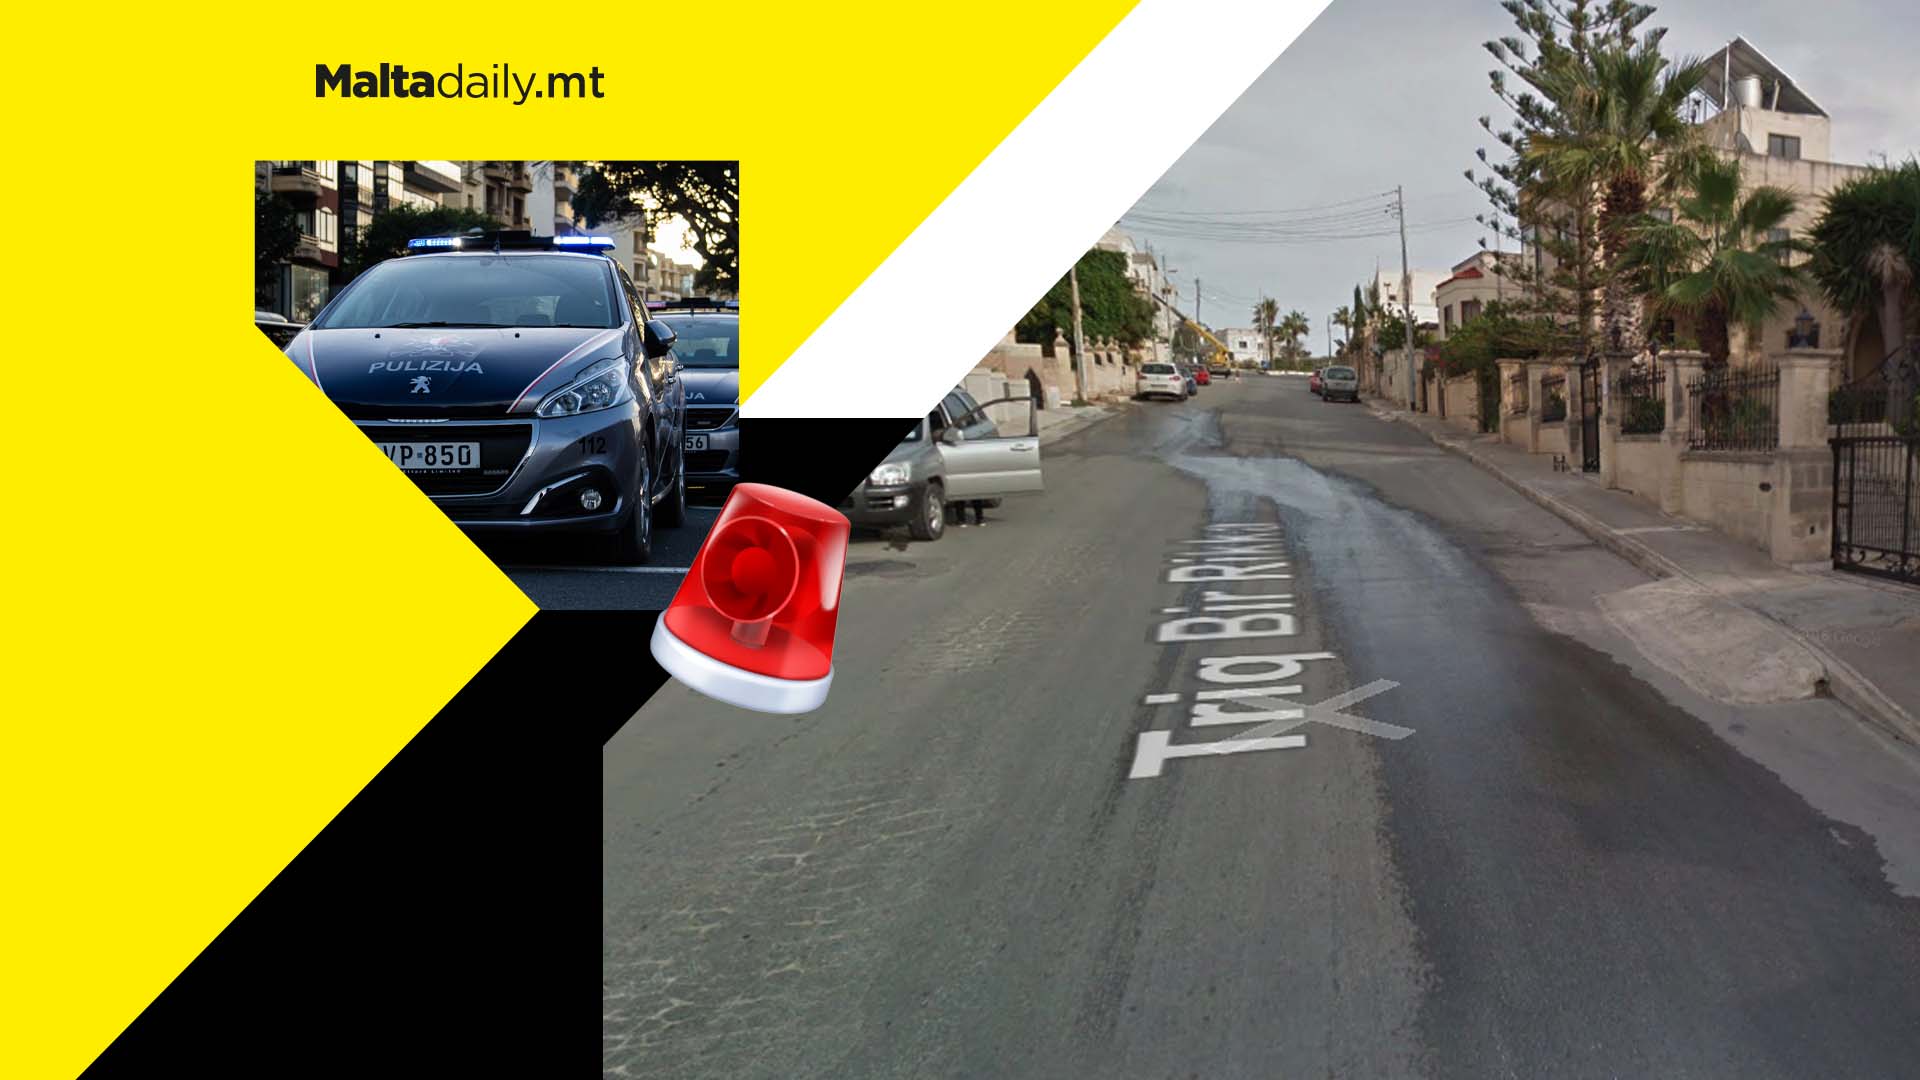 7 year old boy hit by motorcycle in Marsaxlokk accident